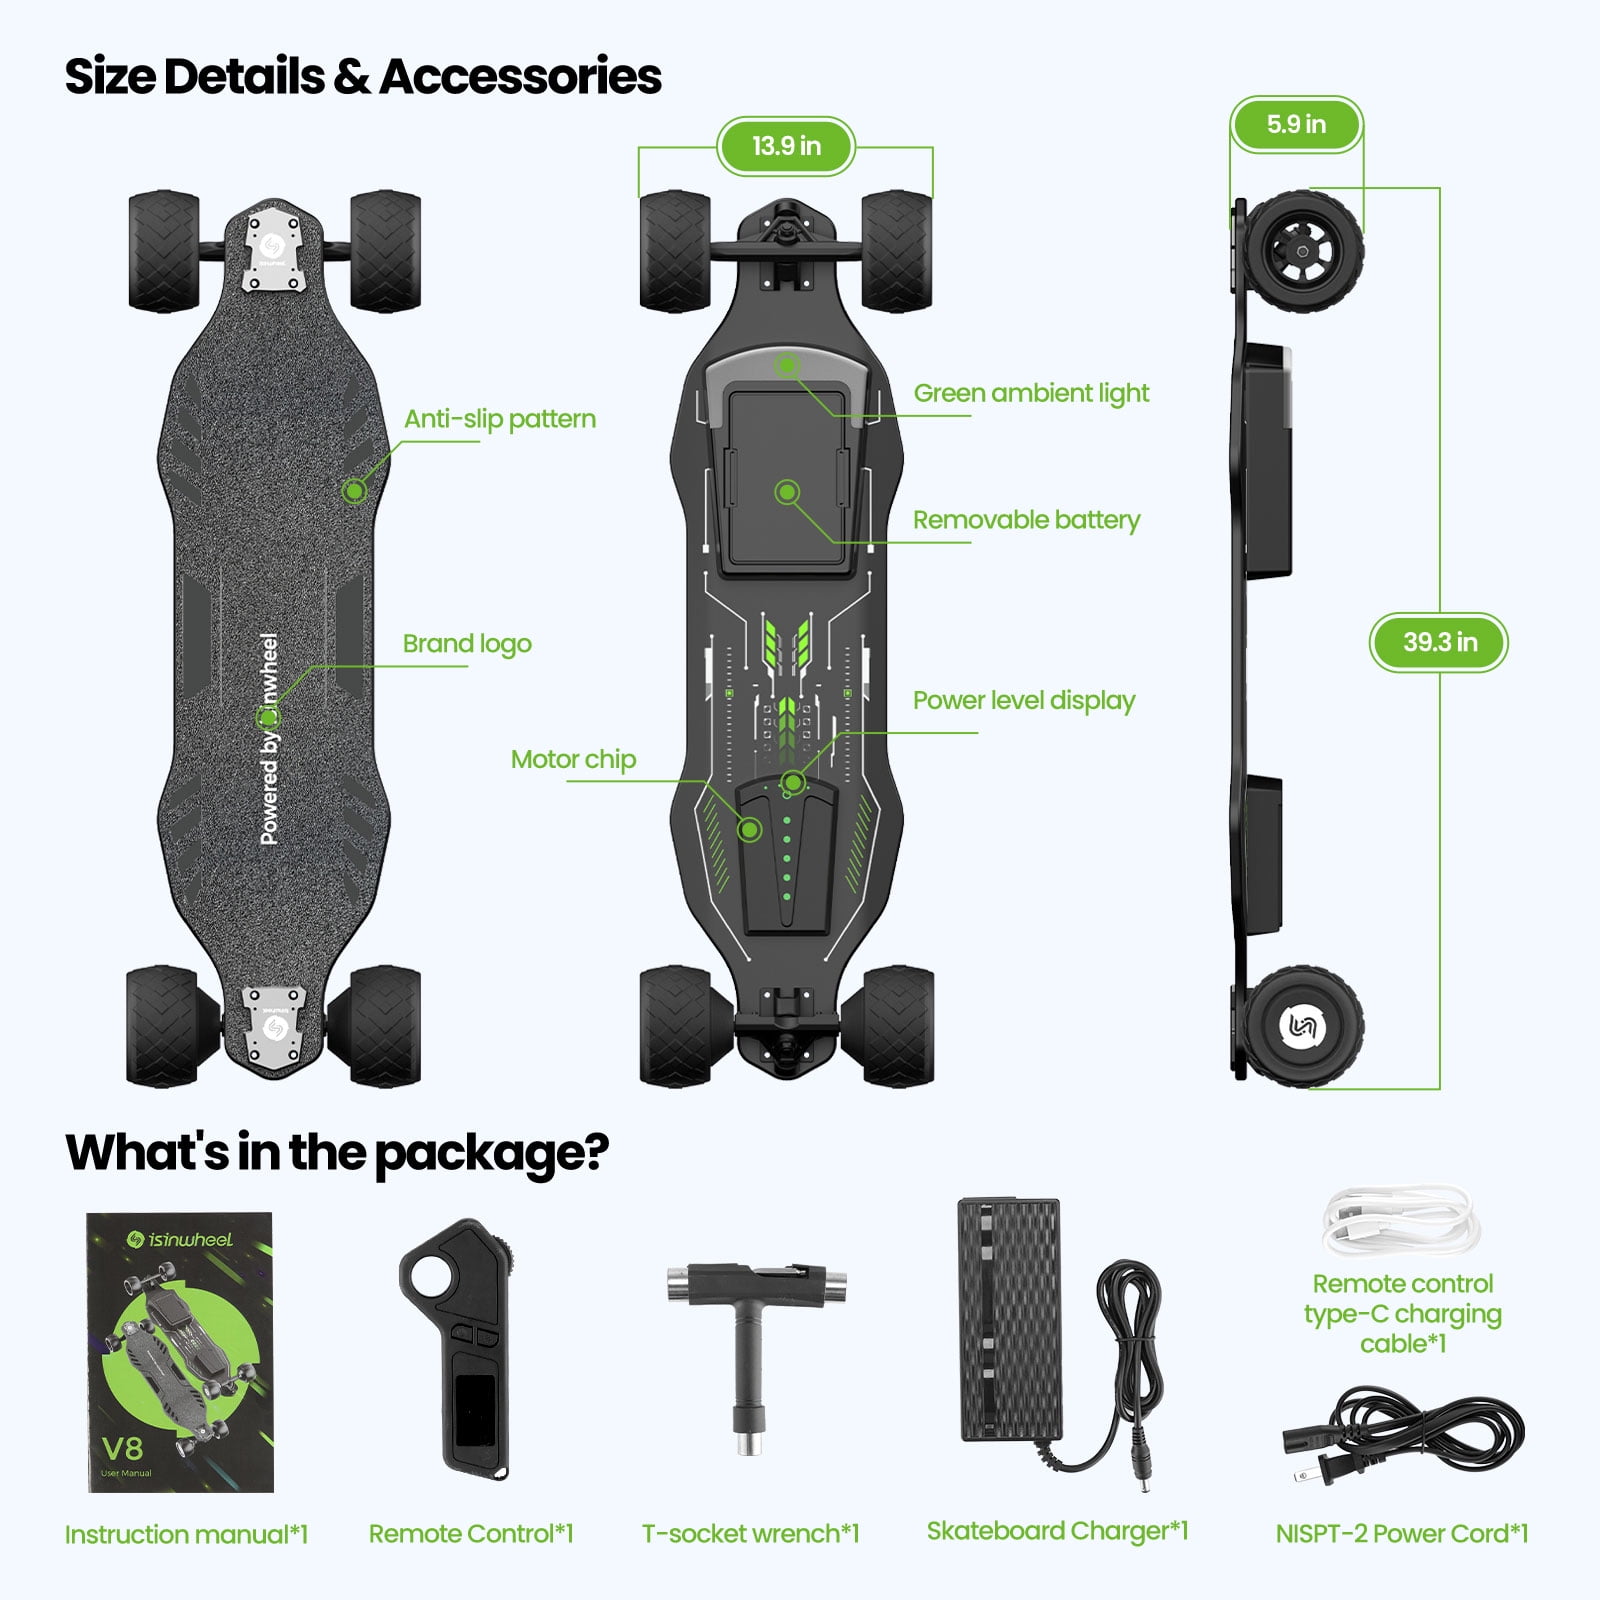 Manke D8 PRO Foldable Isinwheel I9 Electric Scooter Lightweight Longboard  Hoverboard Skateboard With 30KM Mile Range And APP Control From Airmen,  $328.05